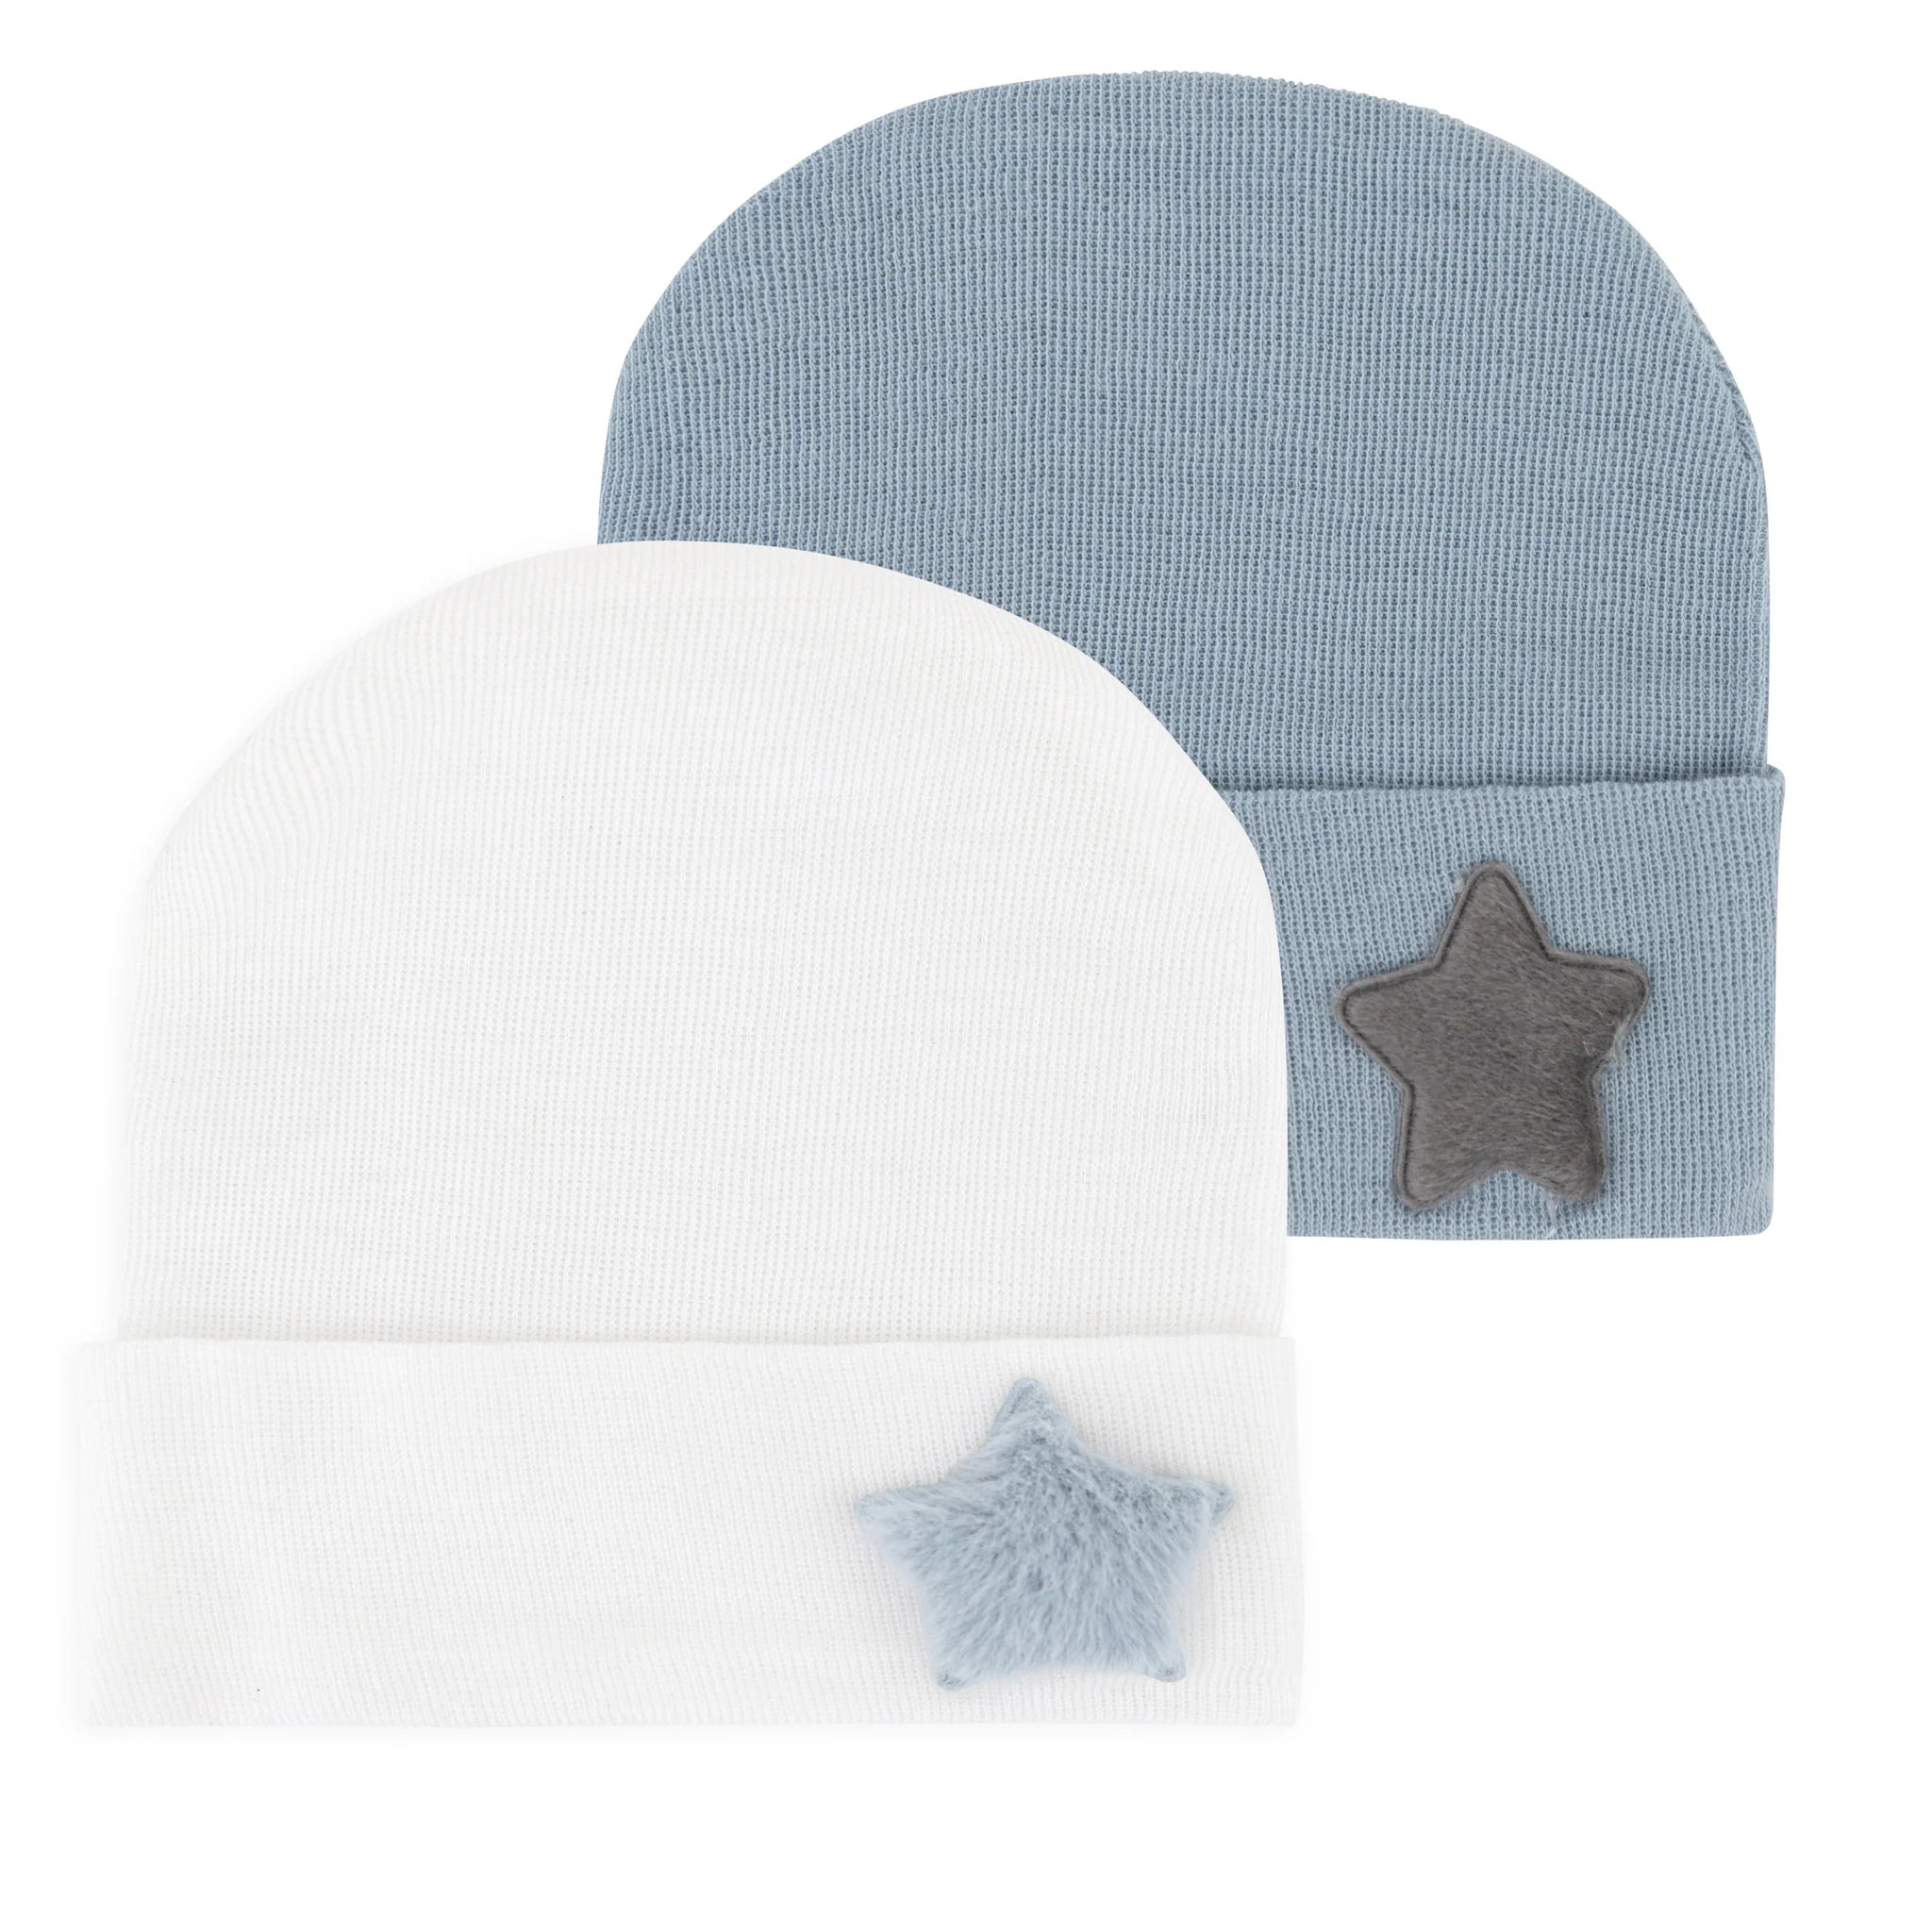 Ely's & Co Blue 2 Pack Hospital Hats